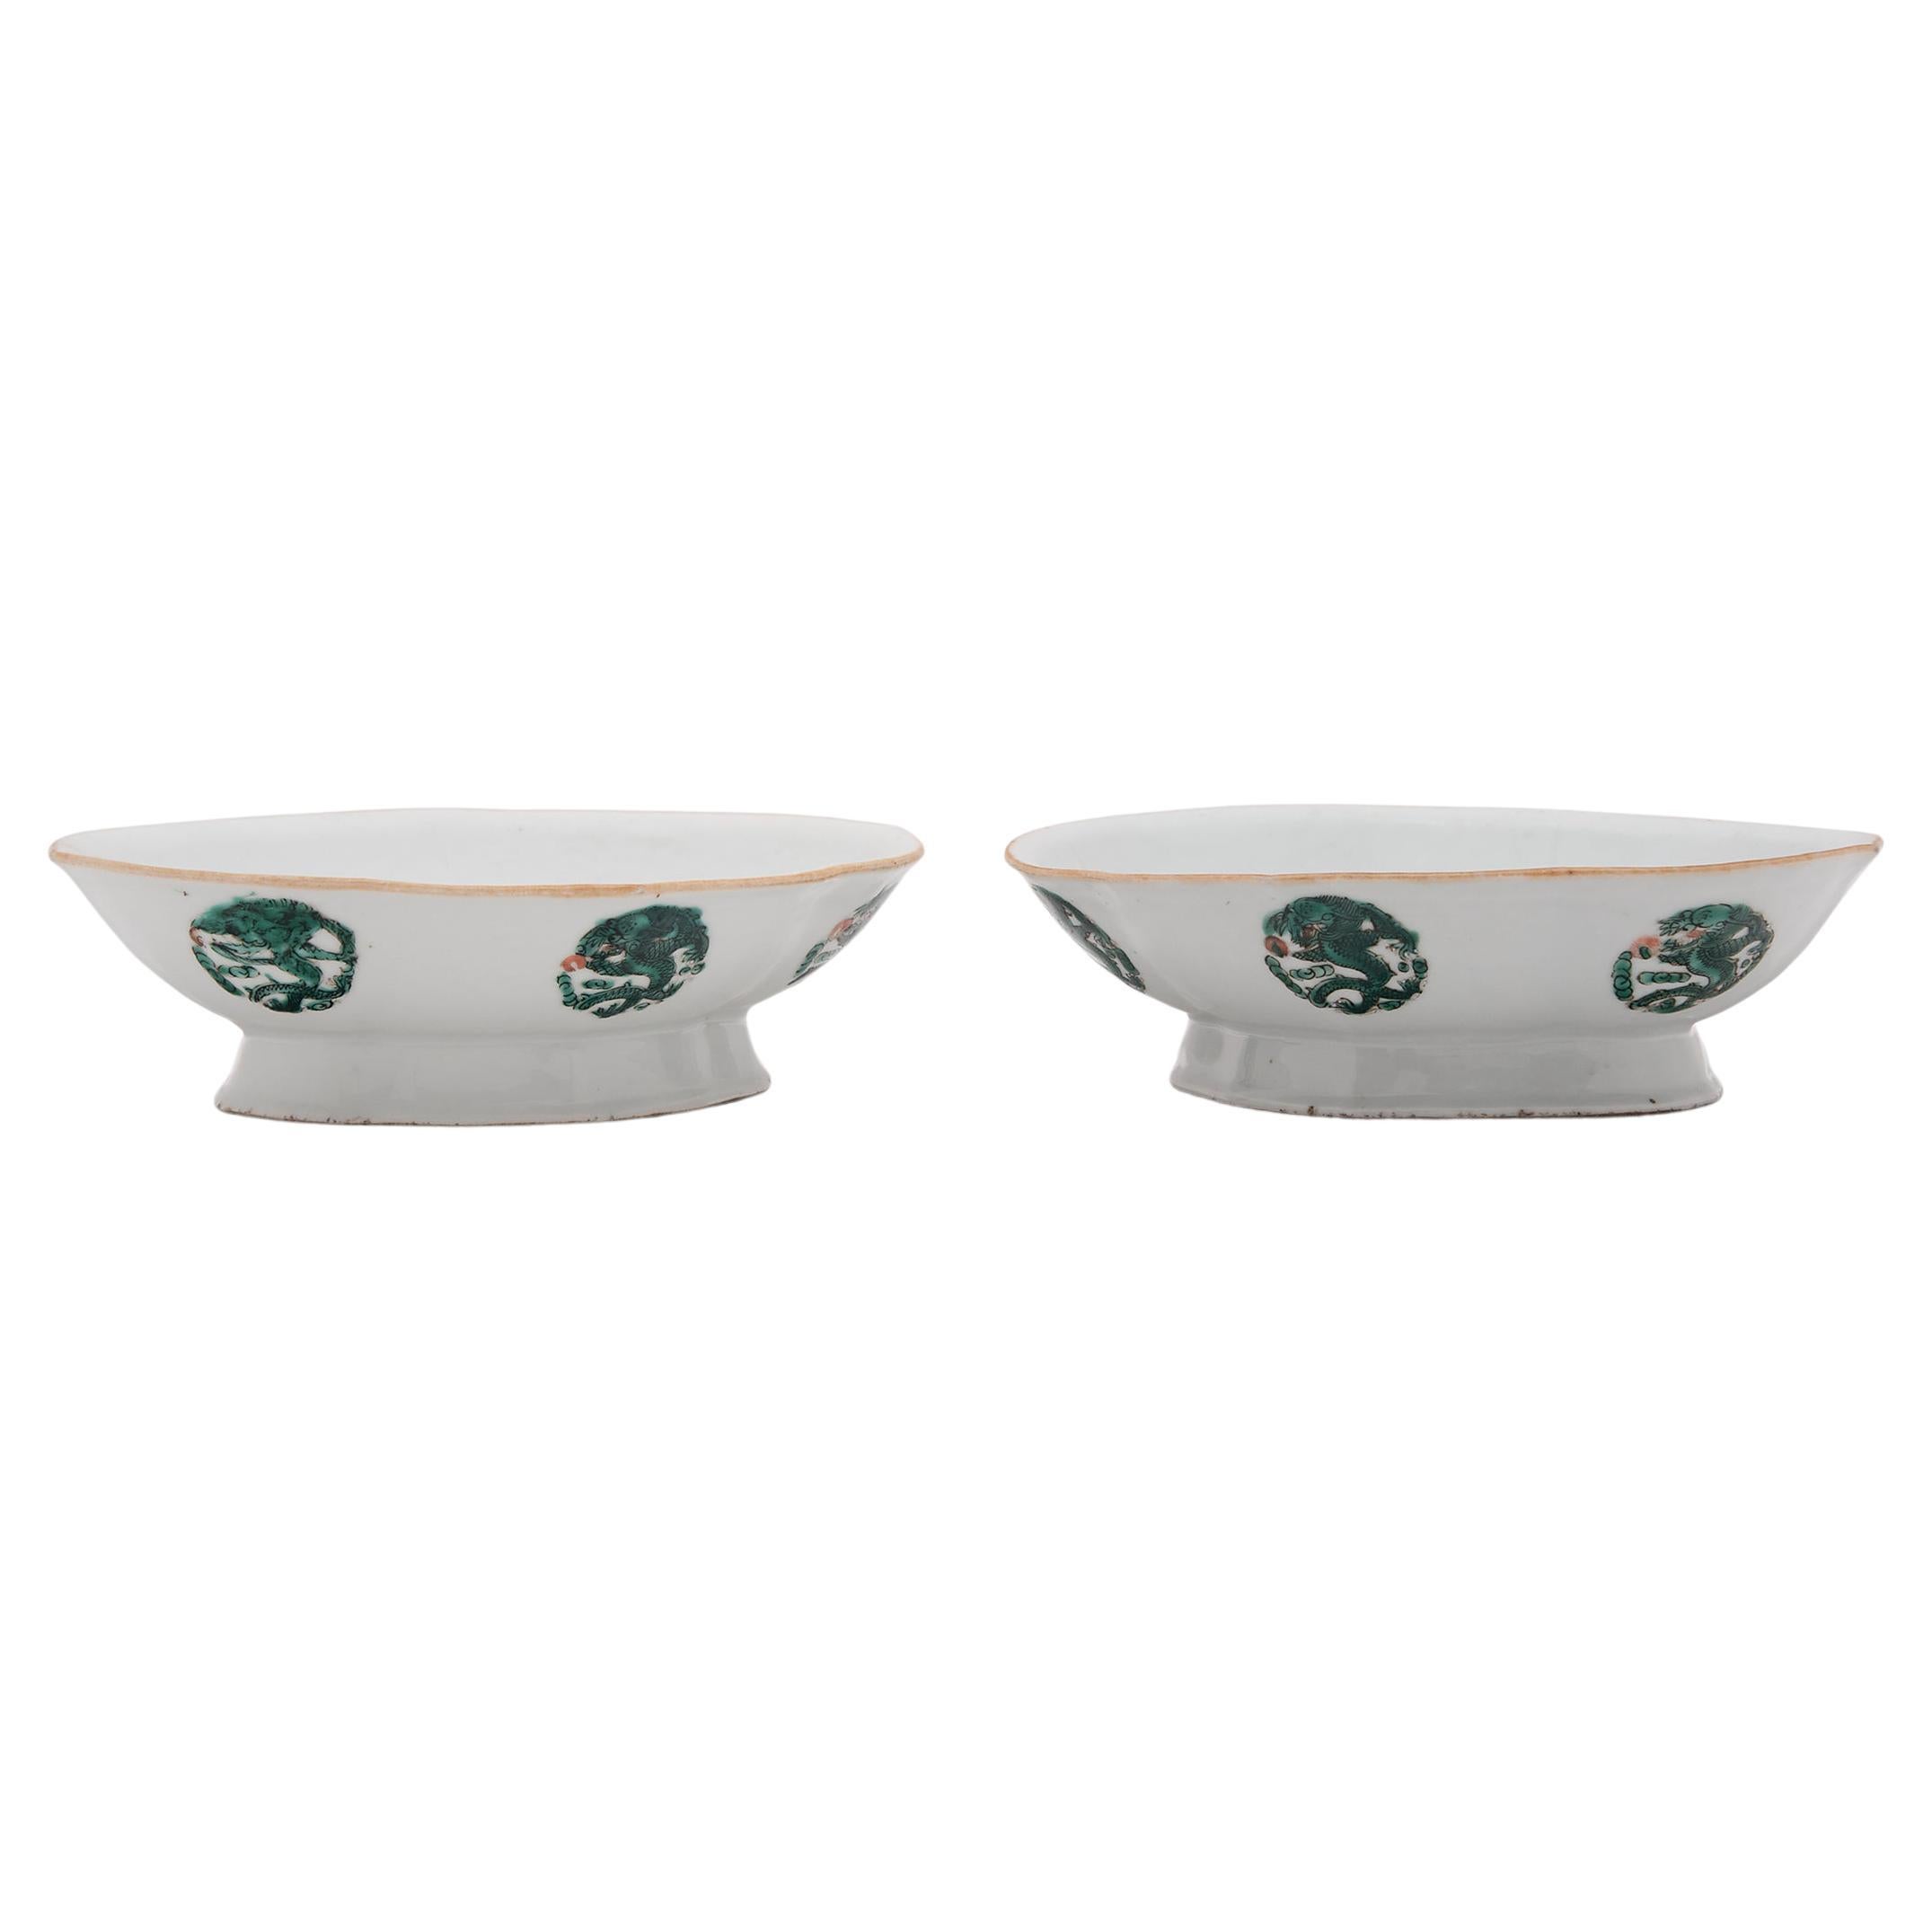 Pair of Chinese Footed Offering Bowls with Celestial Dragons, c. 1850